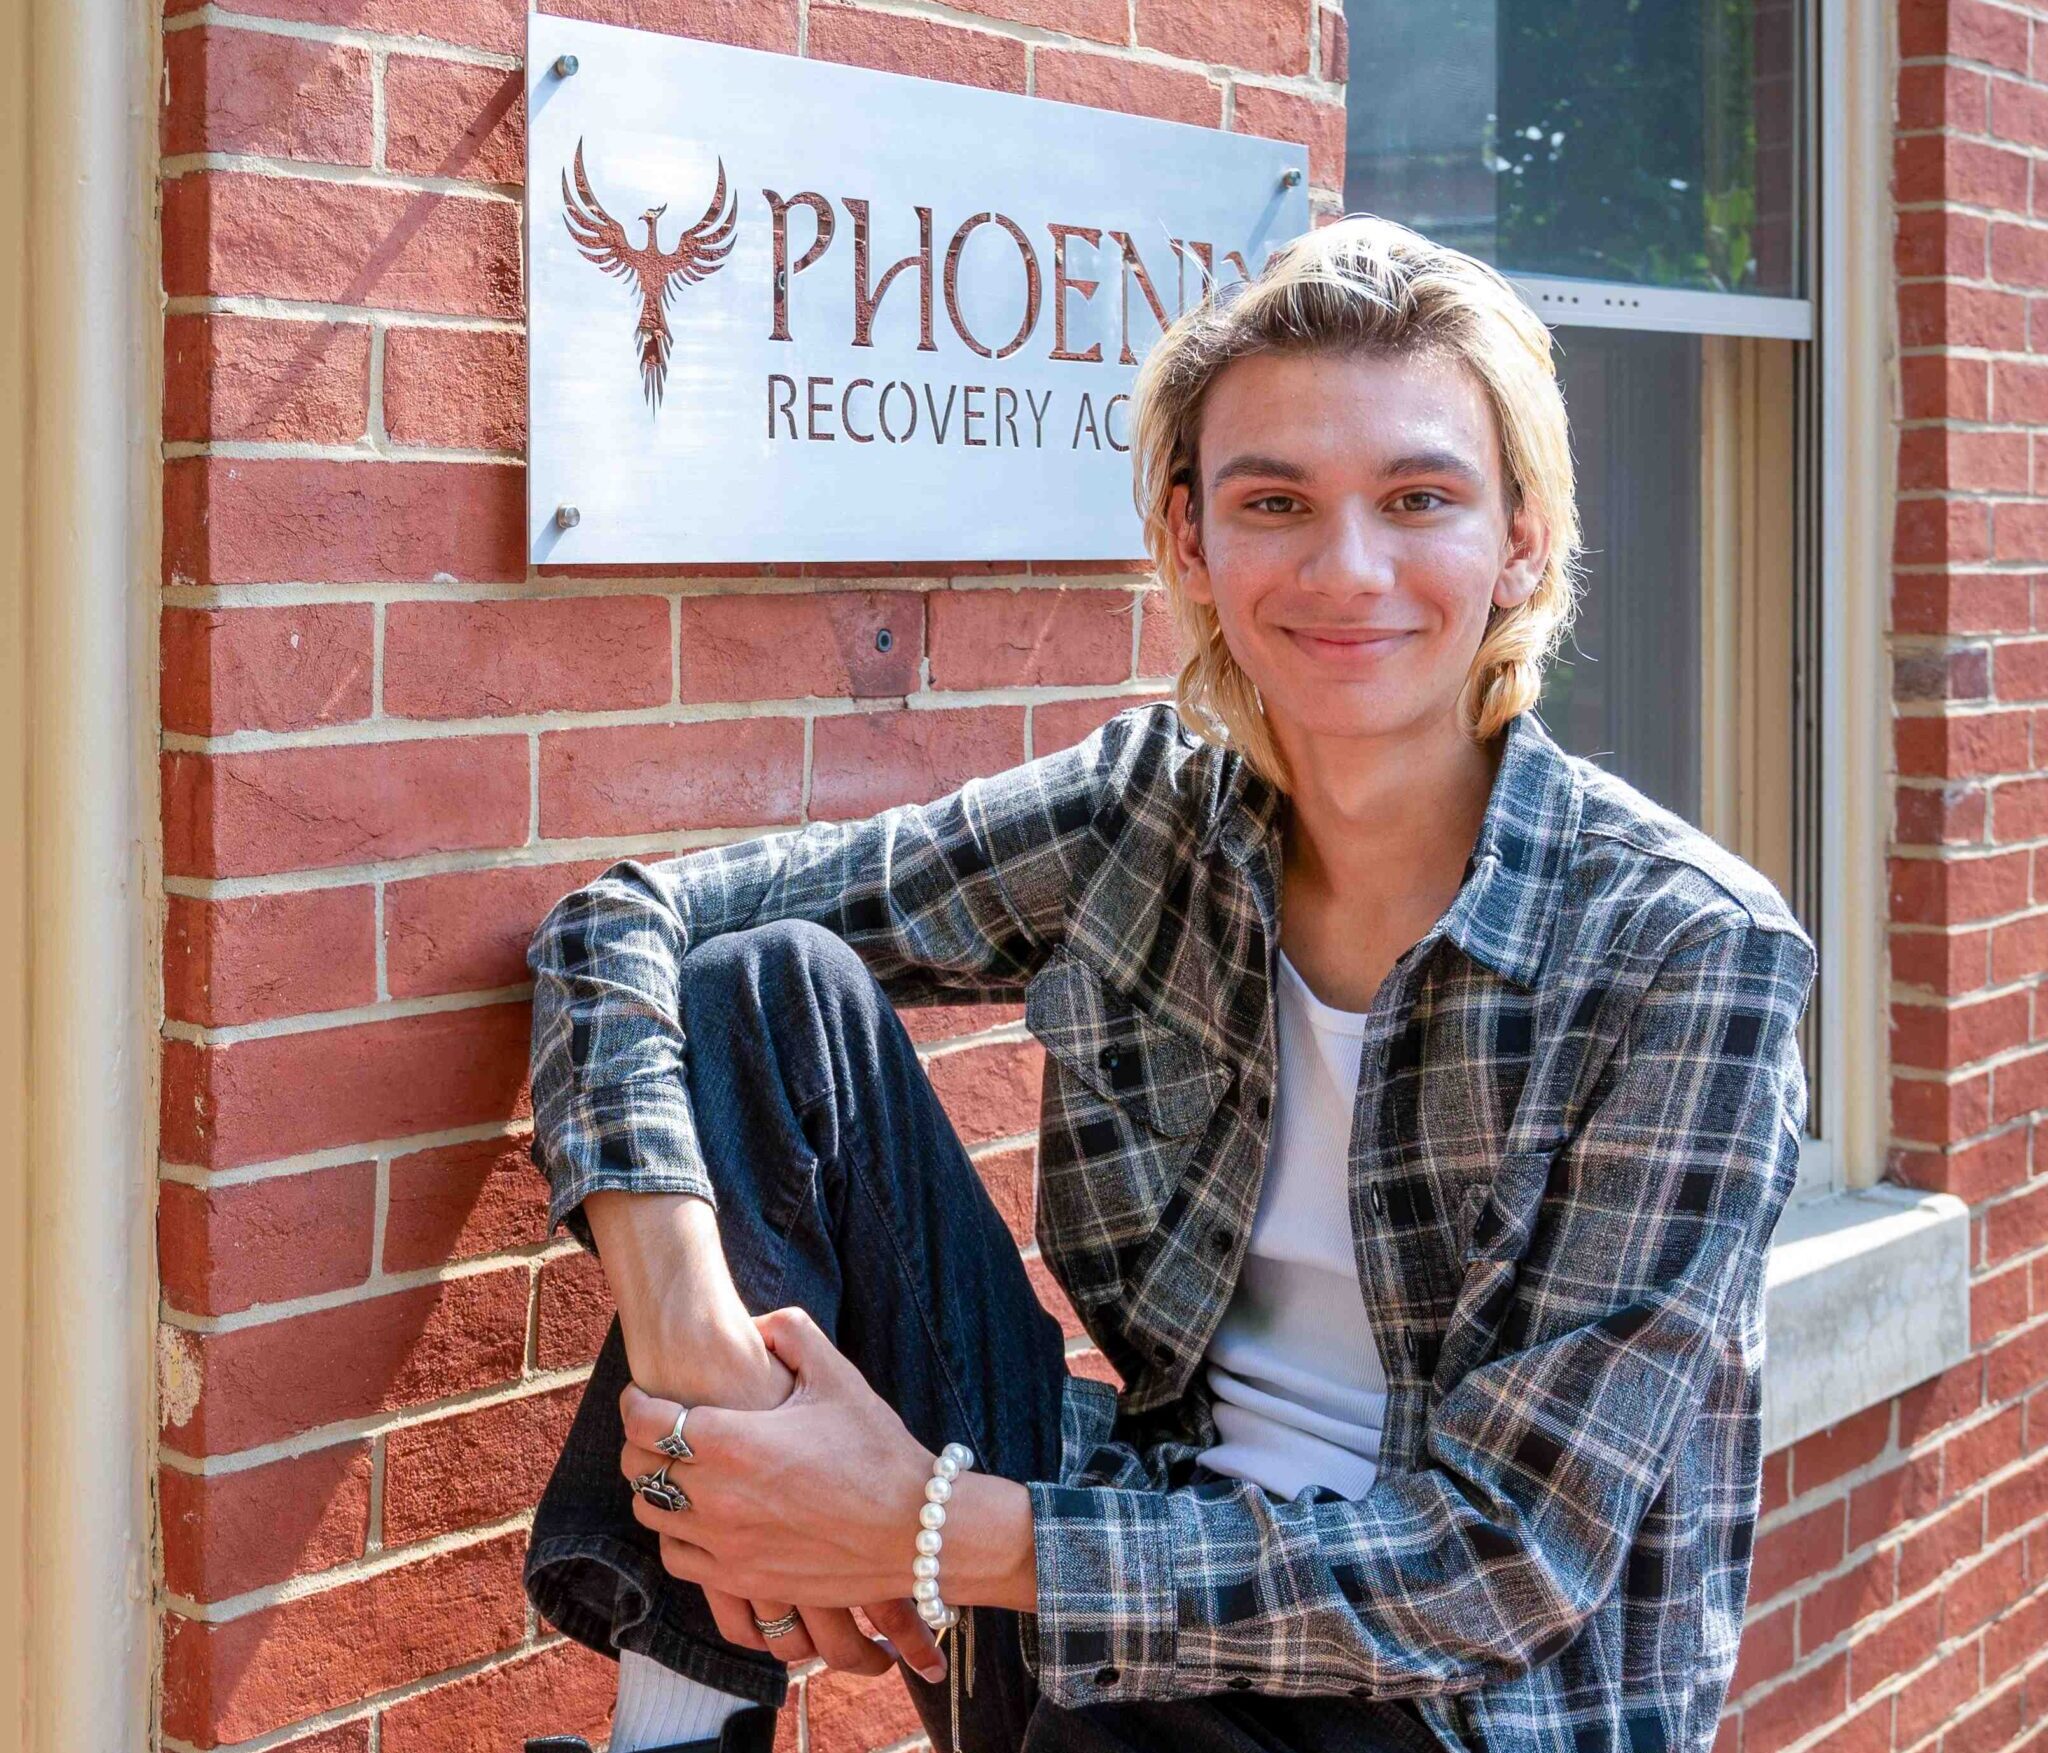 A young man sits on a brick porch in front of a sign that reads "Phoenix Recovery Academy". 